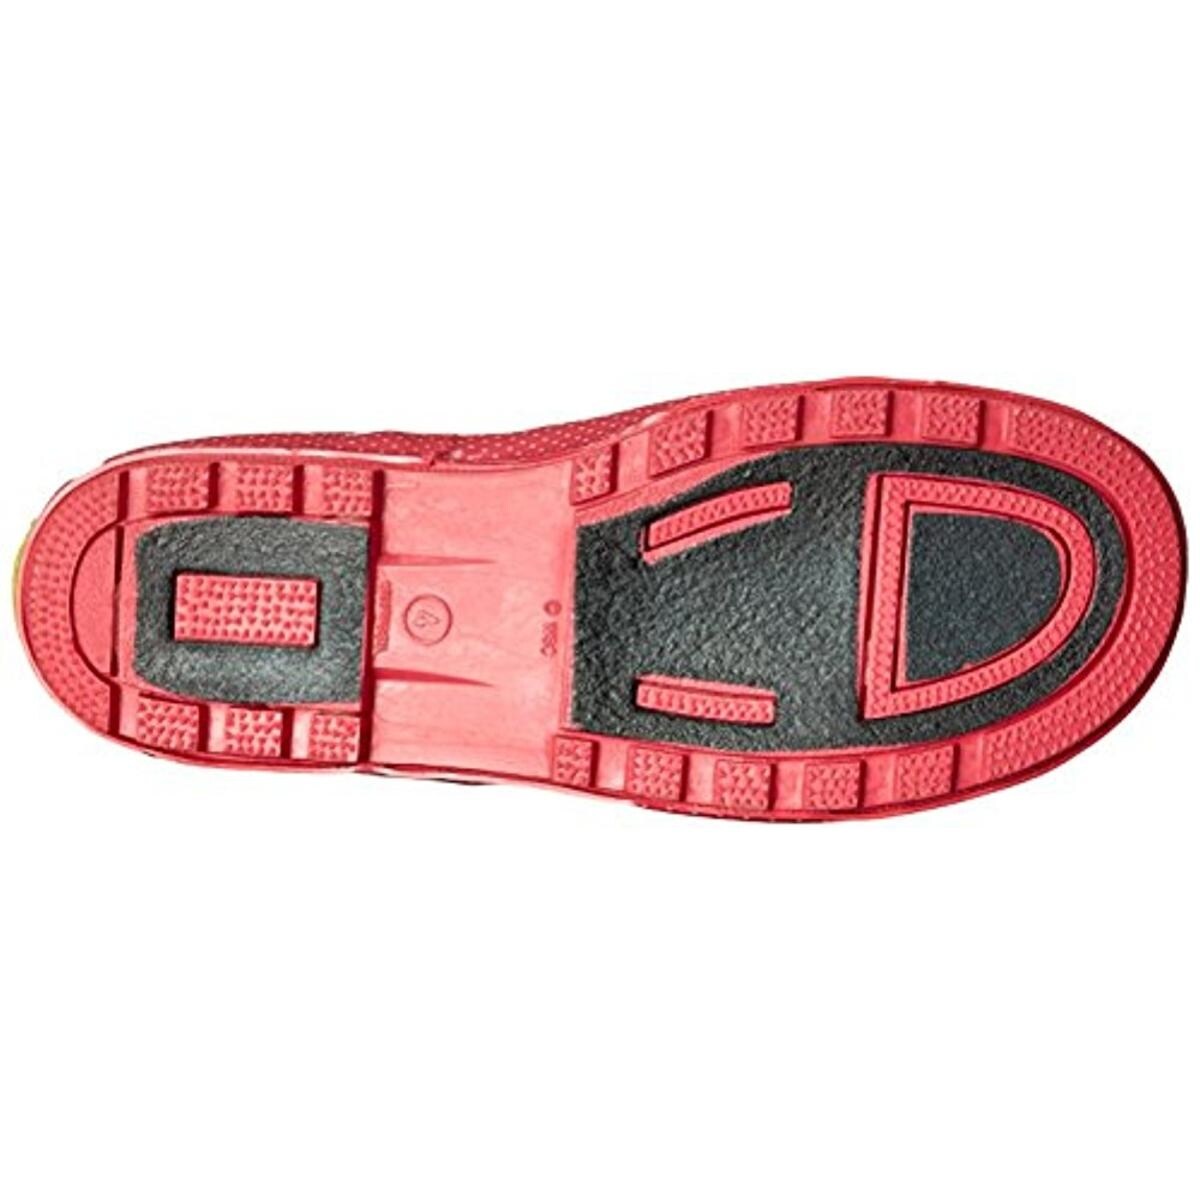 red chief shoes for girls